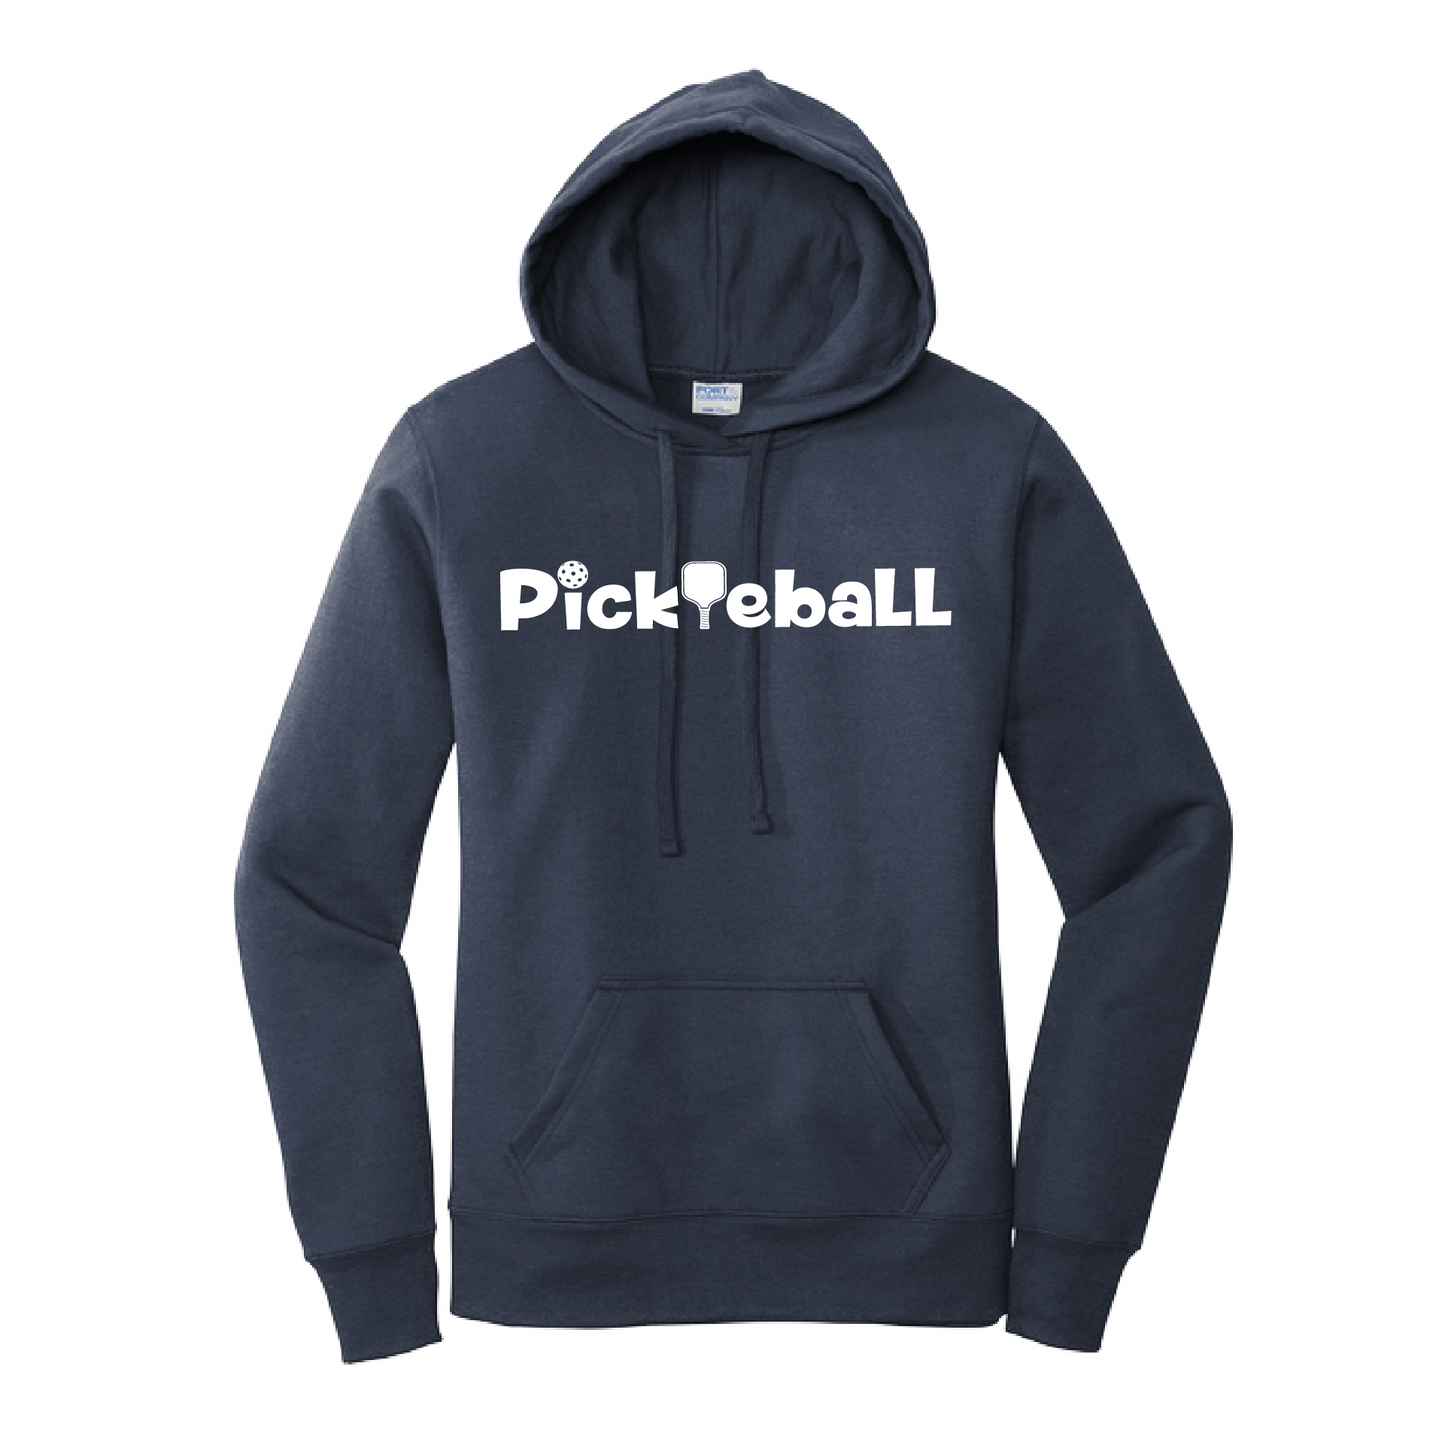 Pickleball Design: Pickleball Horizontal customizable location Women's Hooded pullover Sweatshirt  Turn up the volume in this Women's Sweatshirts with its perfect mix of softness and attitude.  Ultra soft lined inside with a lined hood also.  This is fitted nicely for a women's figure.  Front pouch pocket.